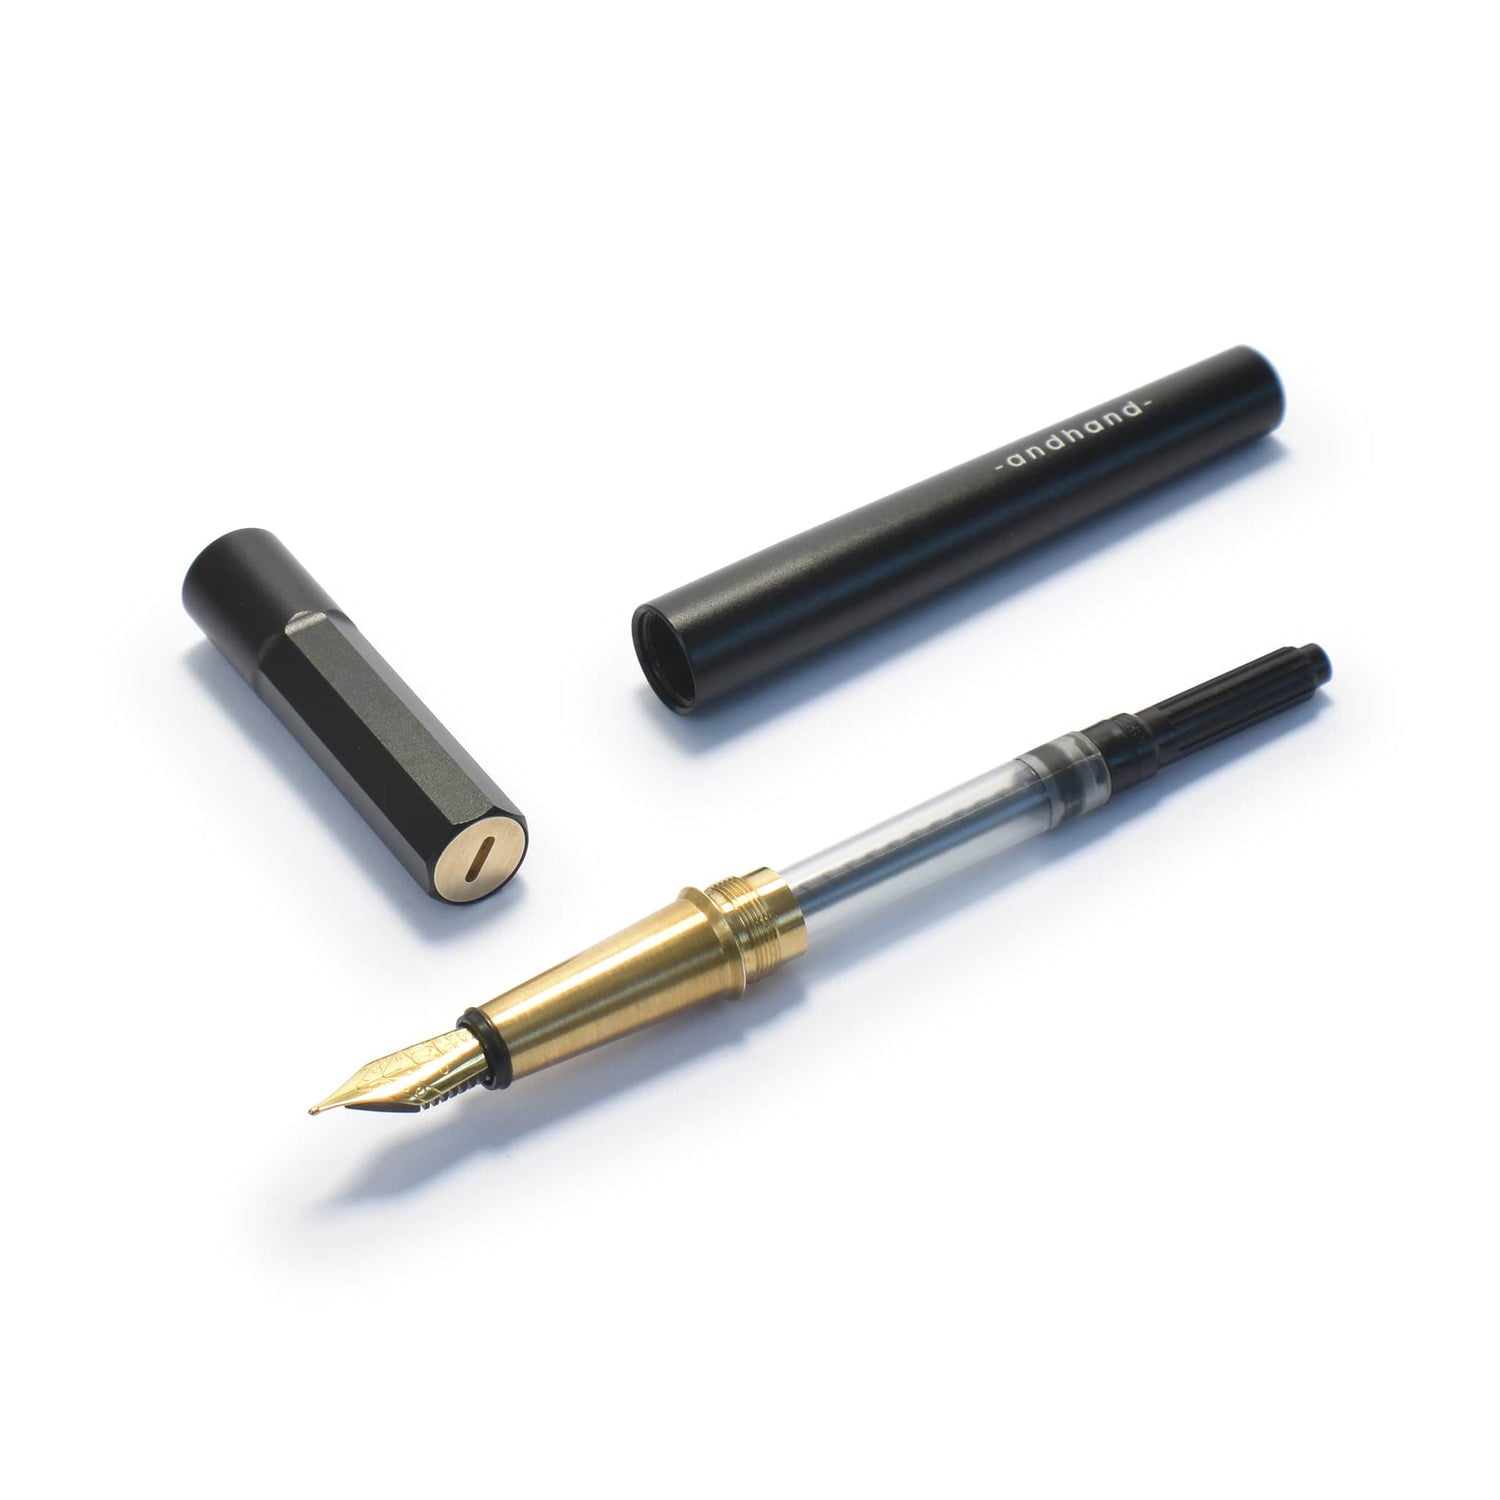 Black and brass fountain pen from Andhand. Shown here disassembled with various components.